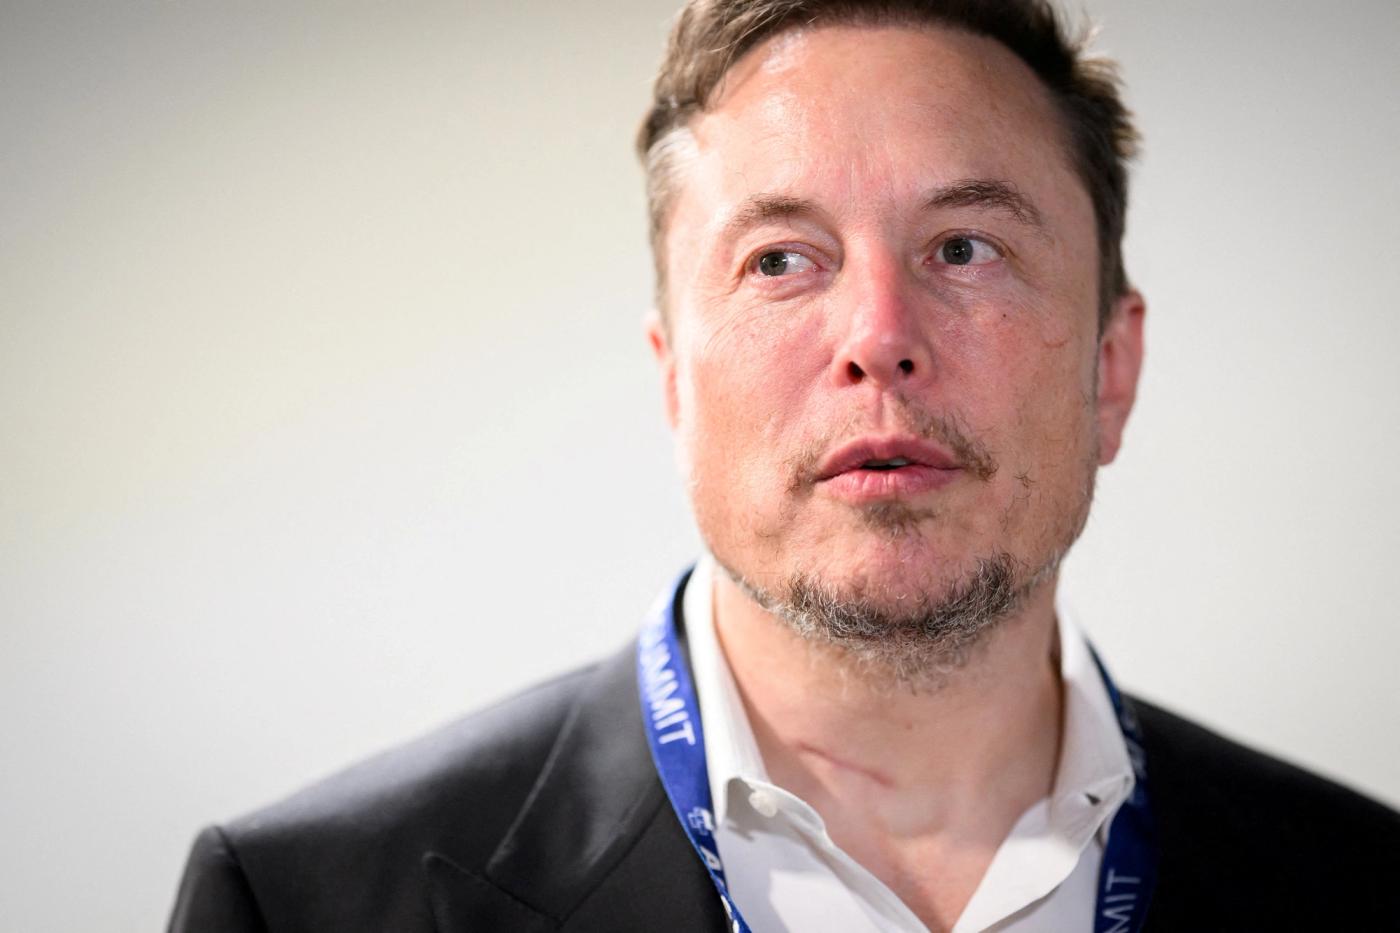 Tesla, X (formerly known as Twitter) and SpaceX's CEO Elon Musk speaks with members of the media during the AI Safety Summit at Bletchley Park in Bletchley, Britain on November 1, 2023. Leon Neal/Pool via REUTERS/File Photo